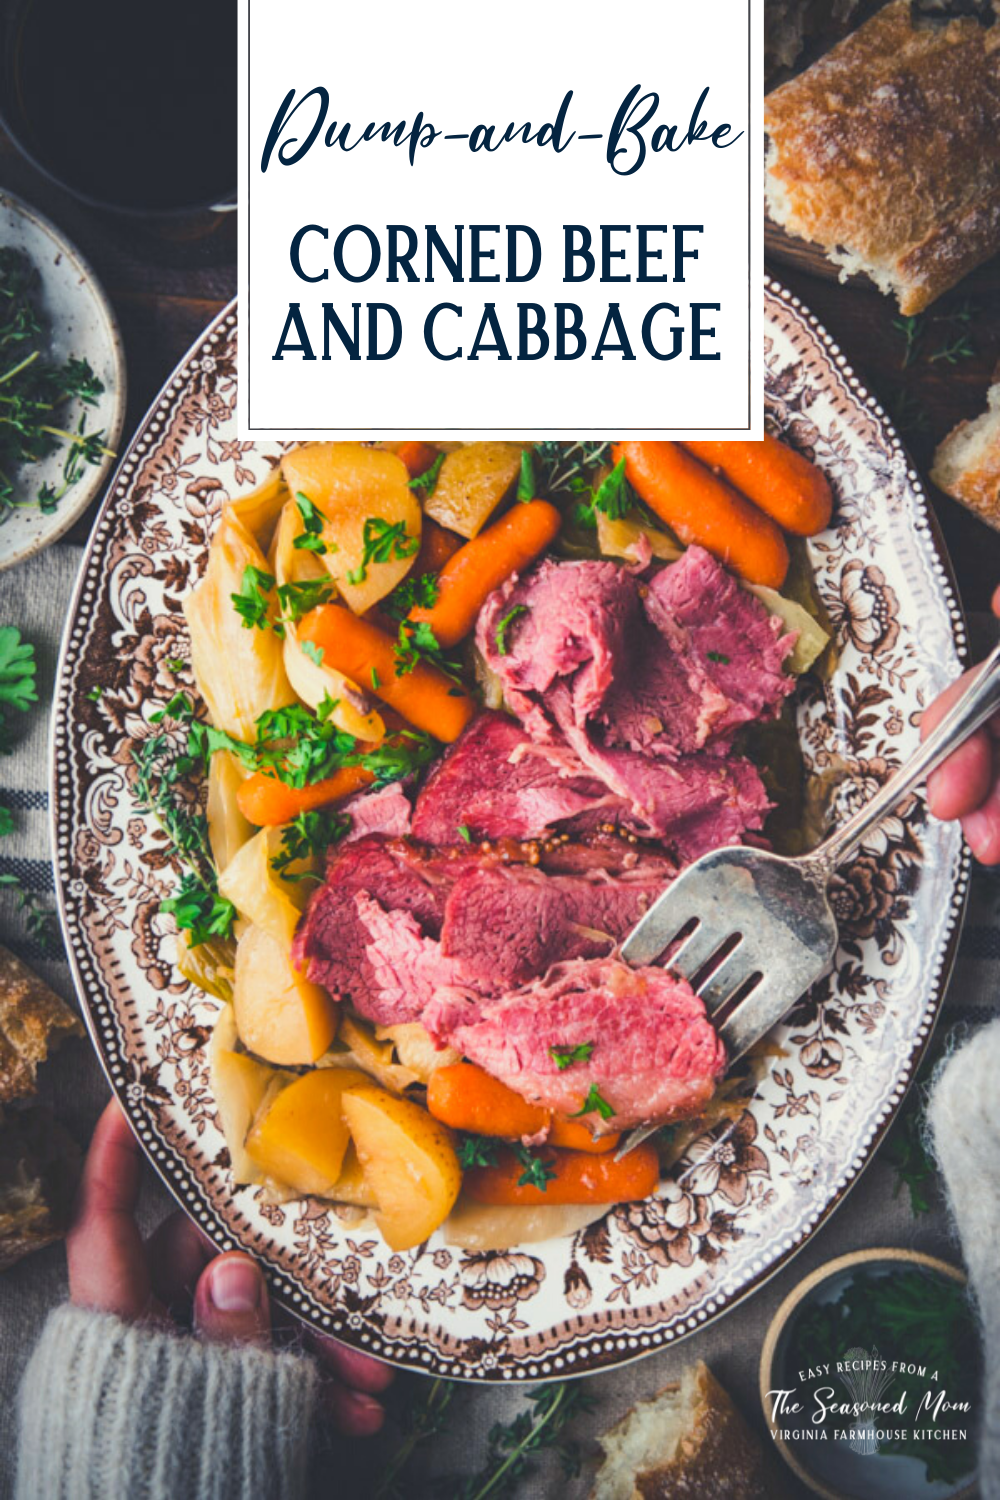 Overhead shot of hands serving a tray of corned beef and cabbage with text title overlay